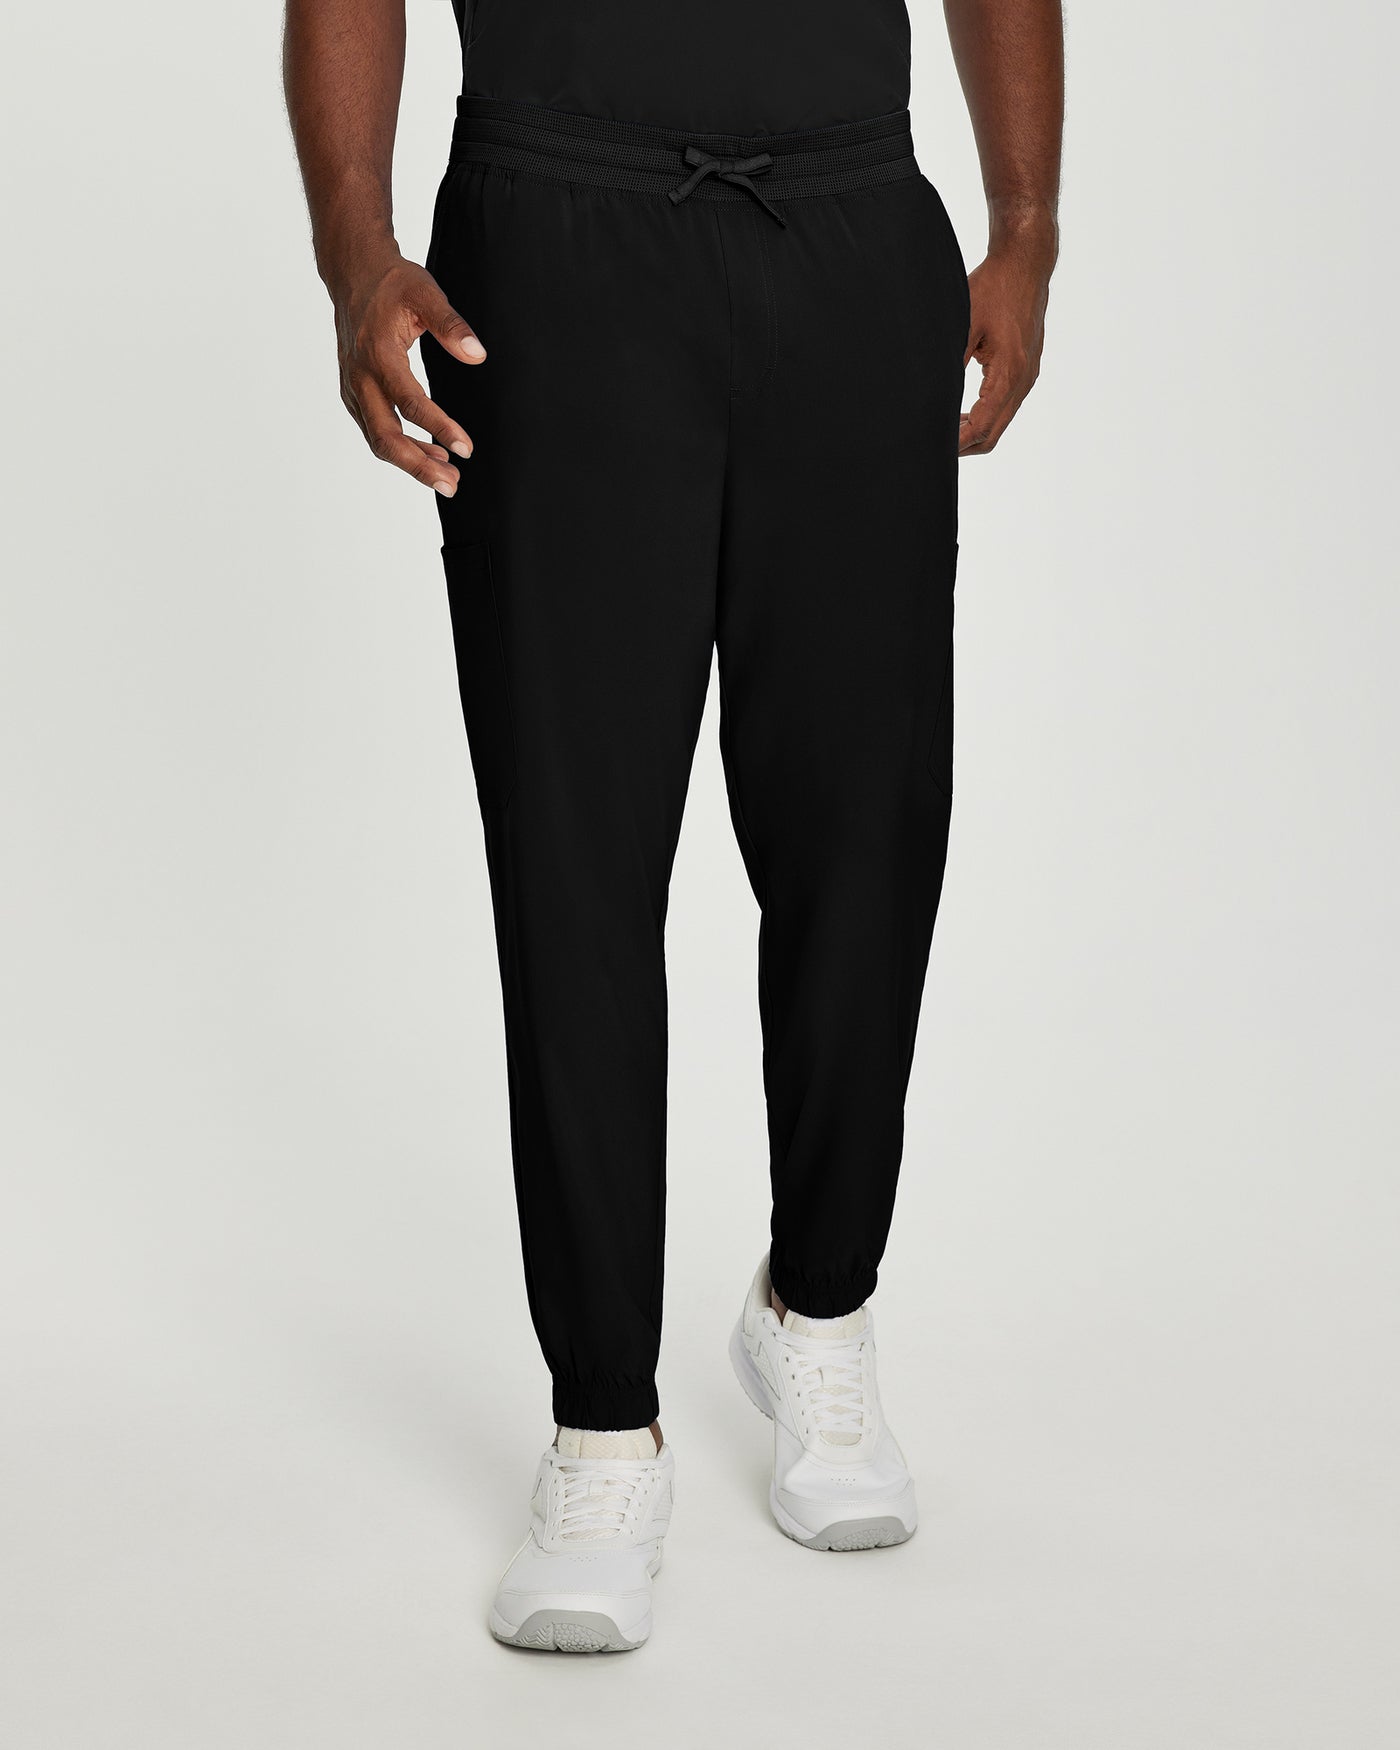 223T White Cross Fit Tall Jogger Pant